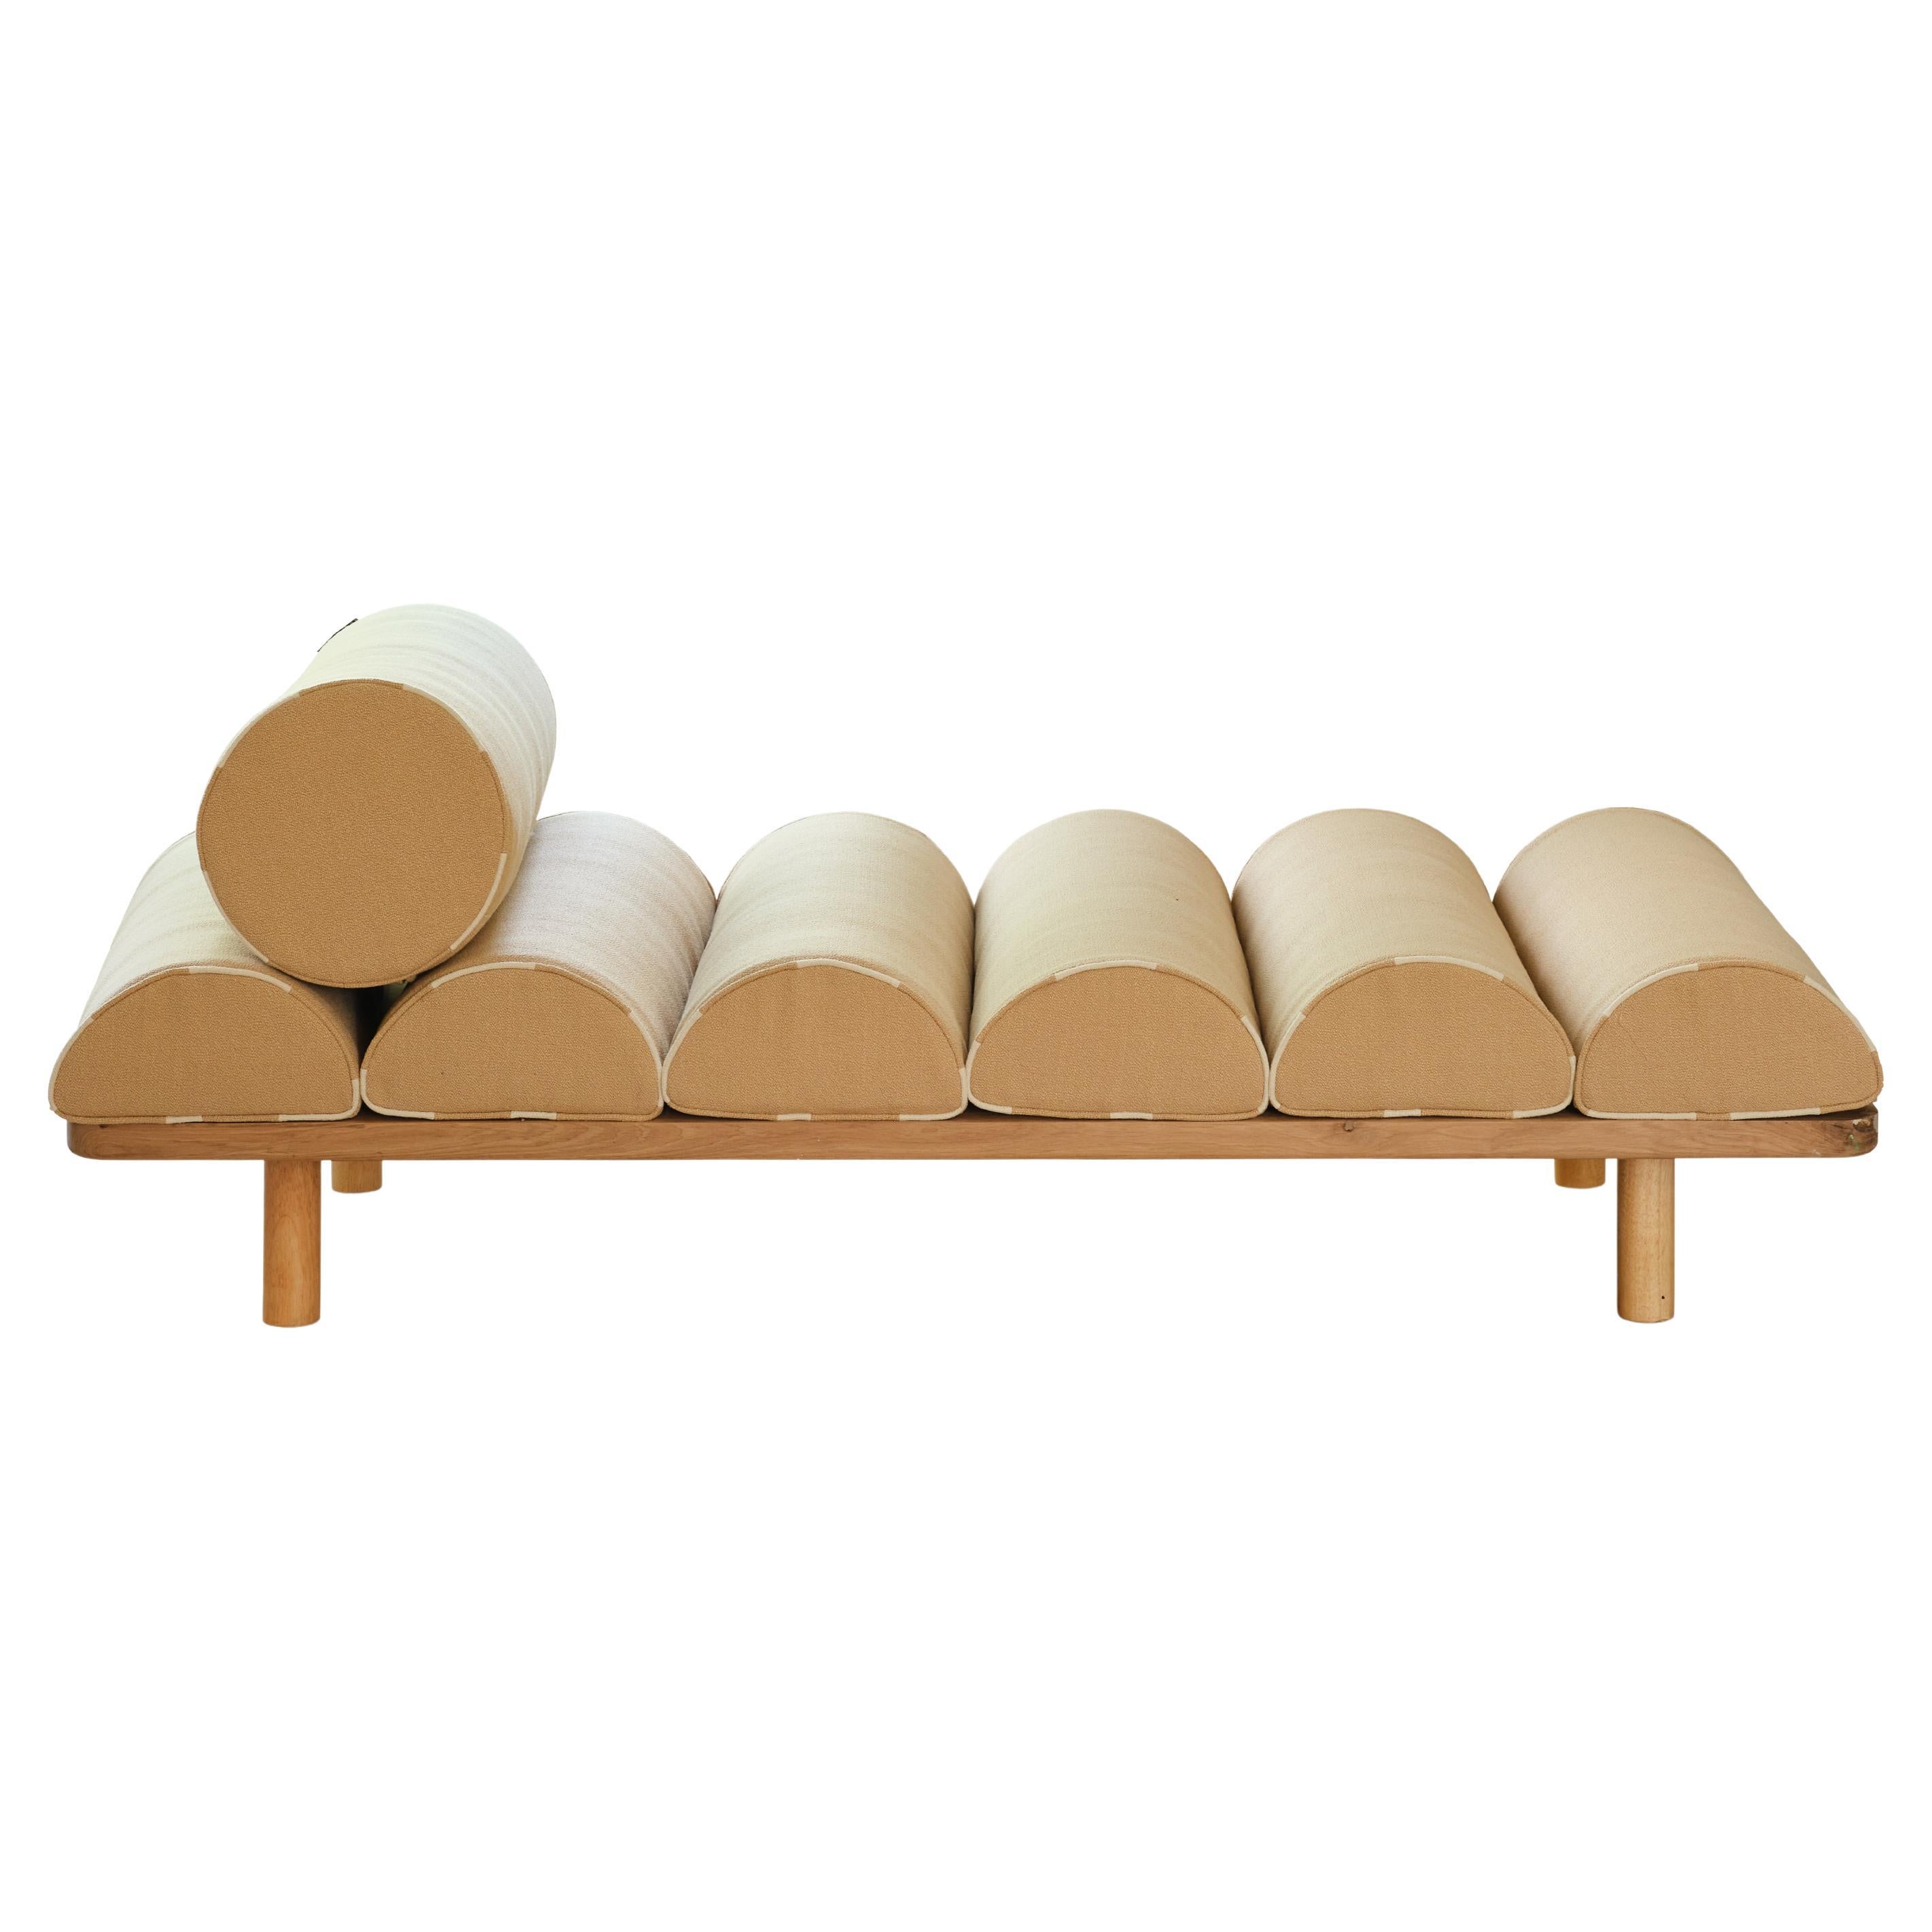 Solid Oak Day Bed, Modern Textile Matress and Bolster Cushions For Sale